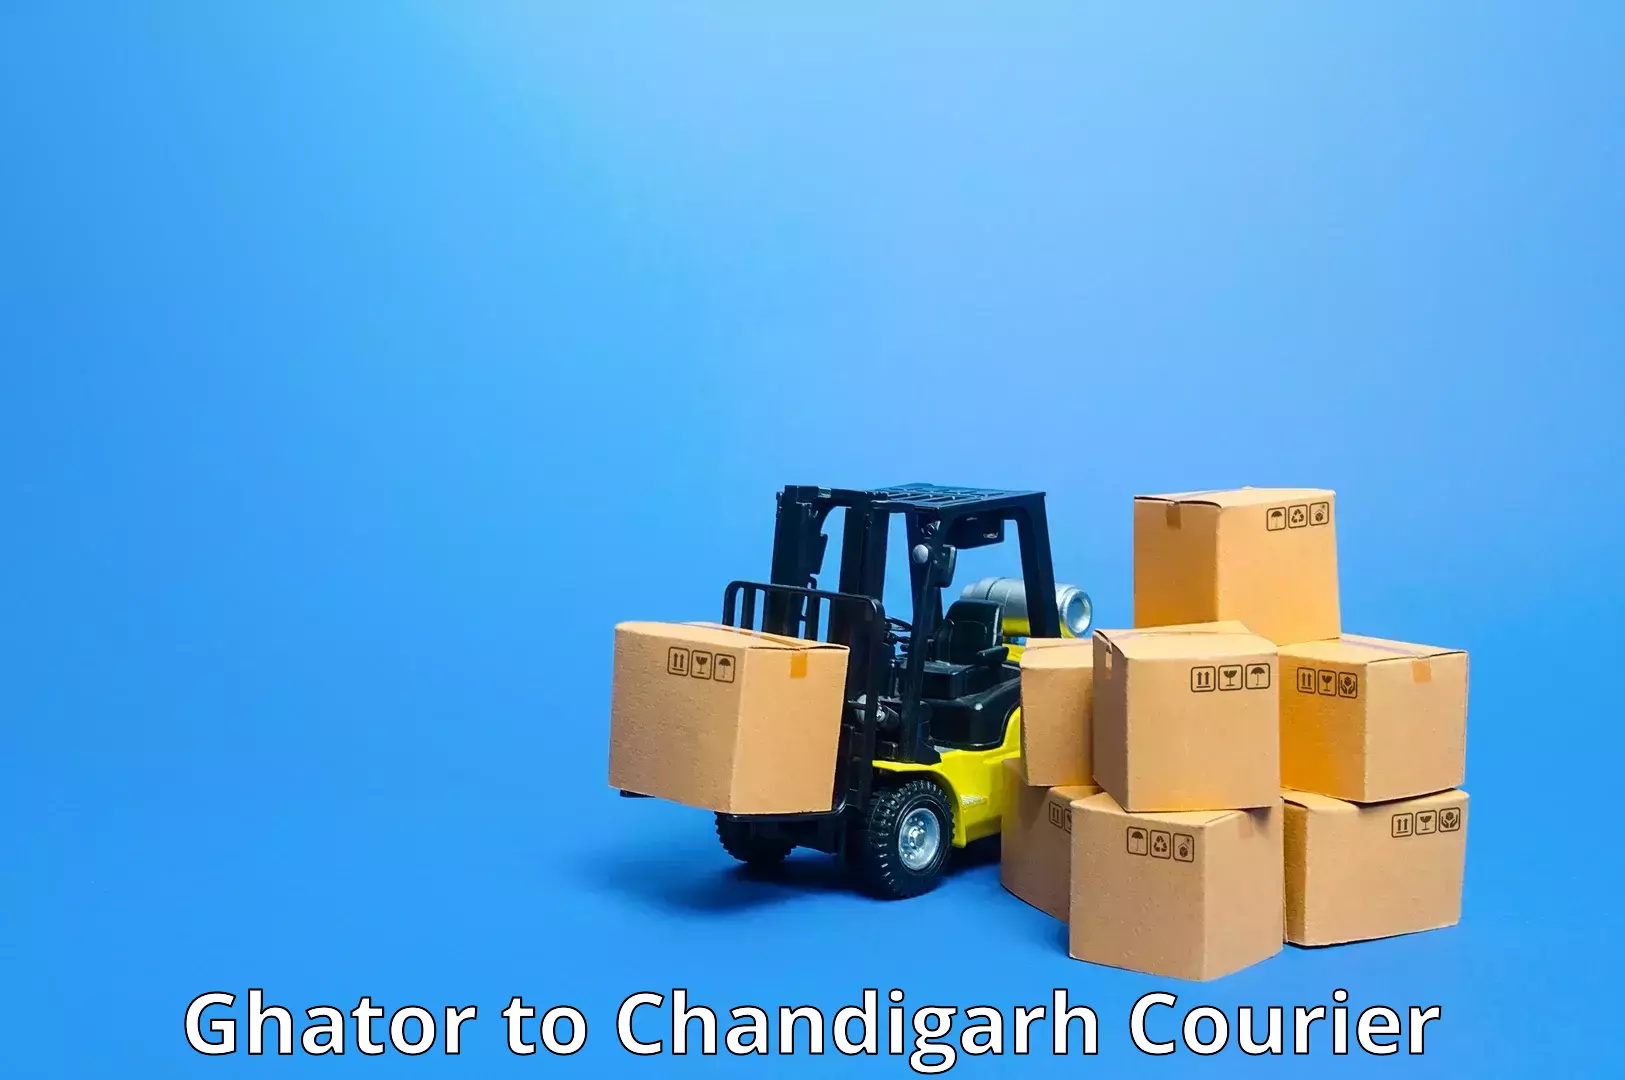 Tech-enabled shipping Ghator to Chandigarh